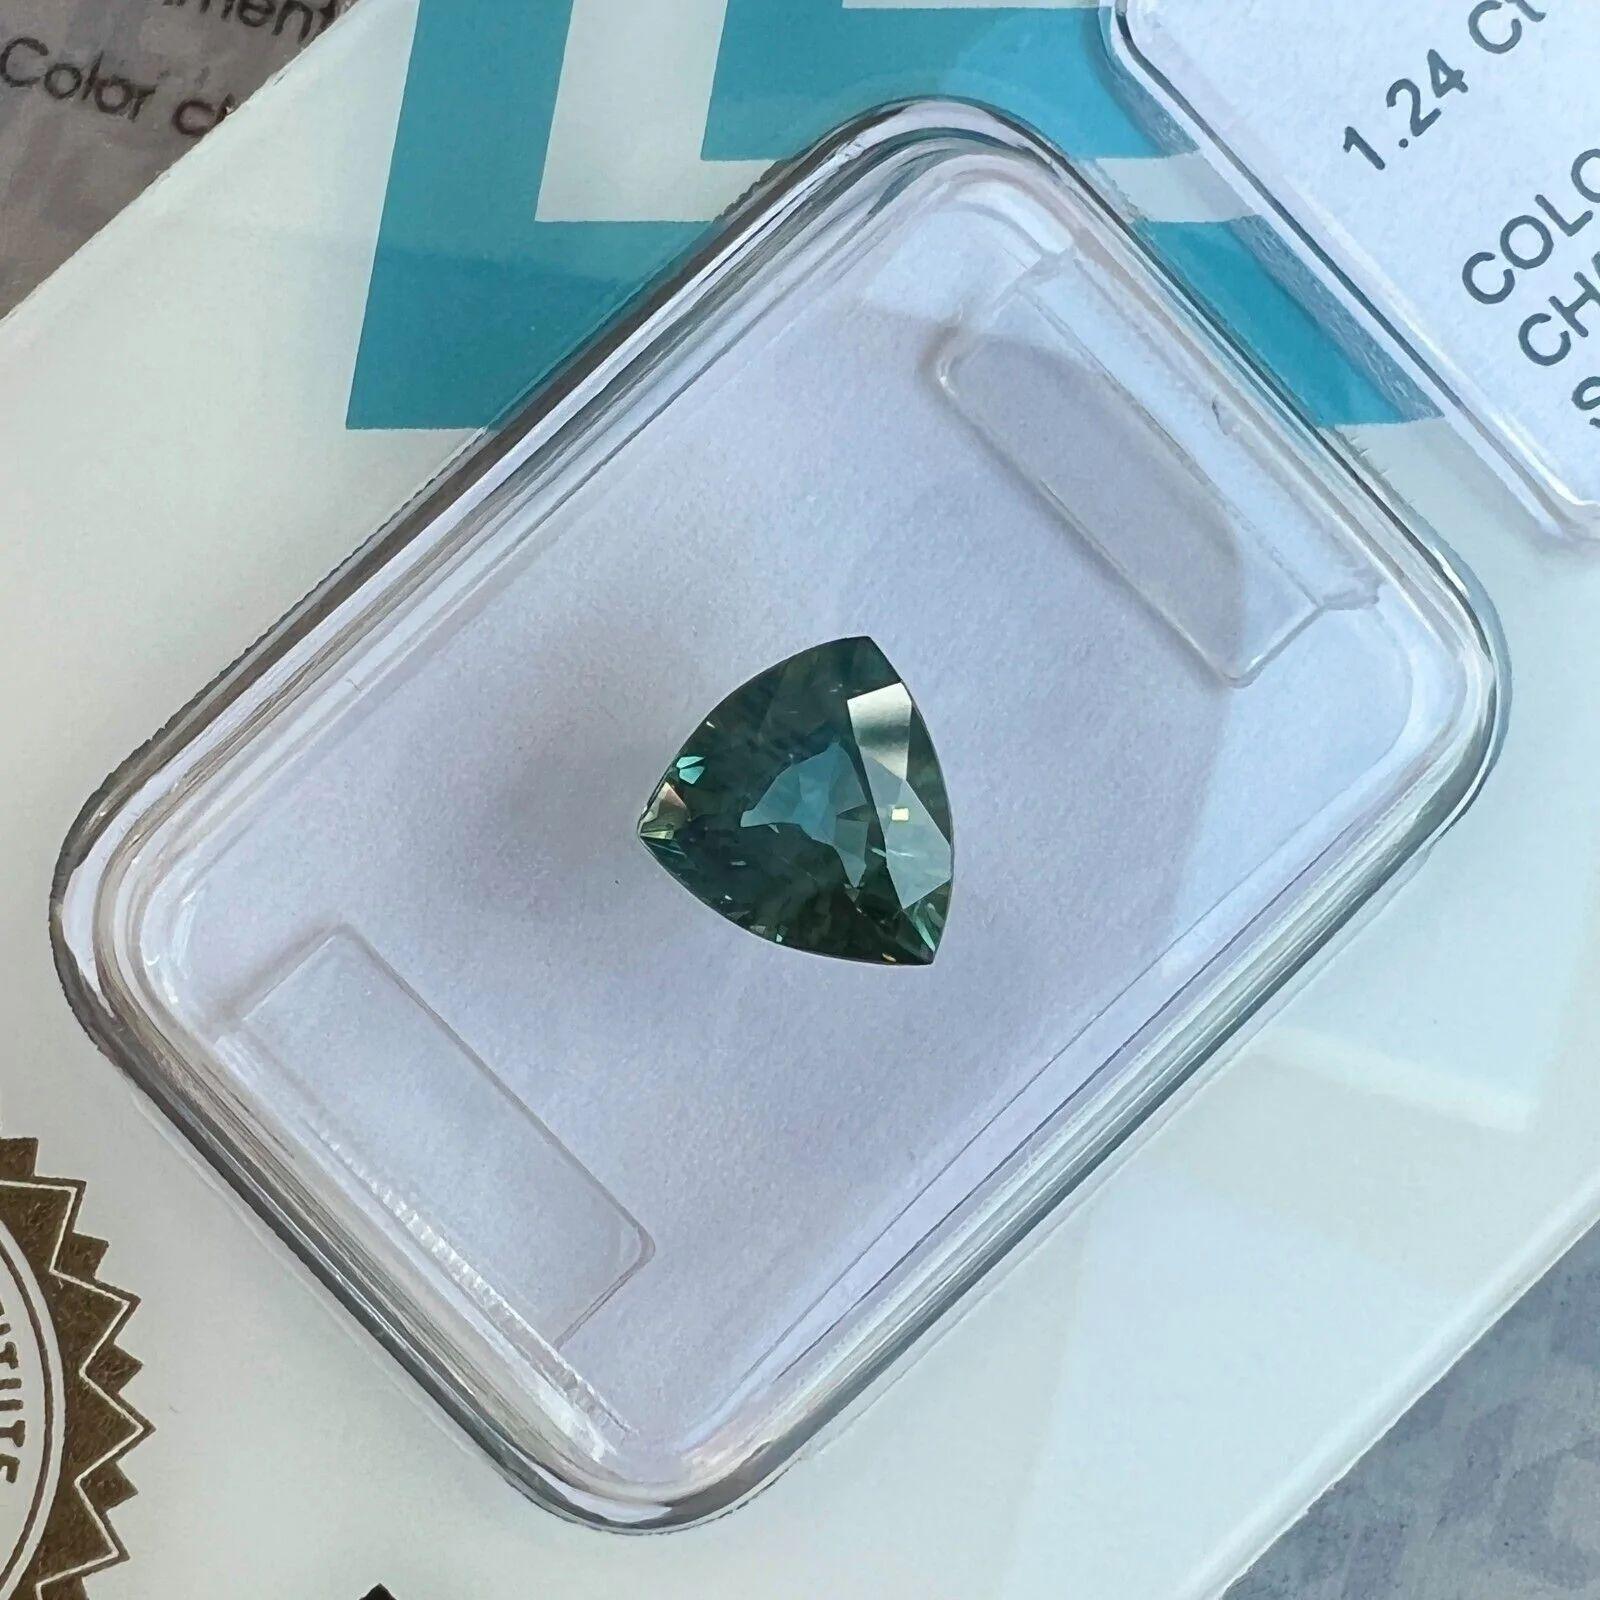 1.24ct Australian Colour Change Sapphire No Heat IGI Certified Triangle Cut

Rare Untreated Australian Colour Change Sapphire Gemstone.
1.24 Carat unheated sapphire with a rare colour change effect. Changing colour depending on the light its viewed